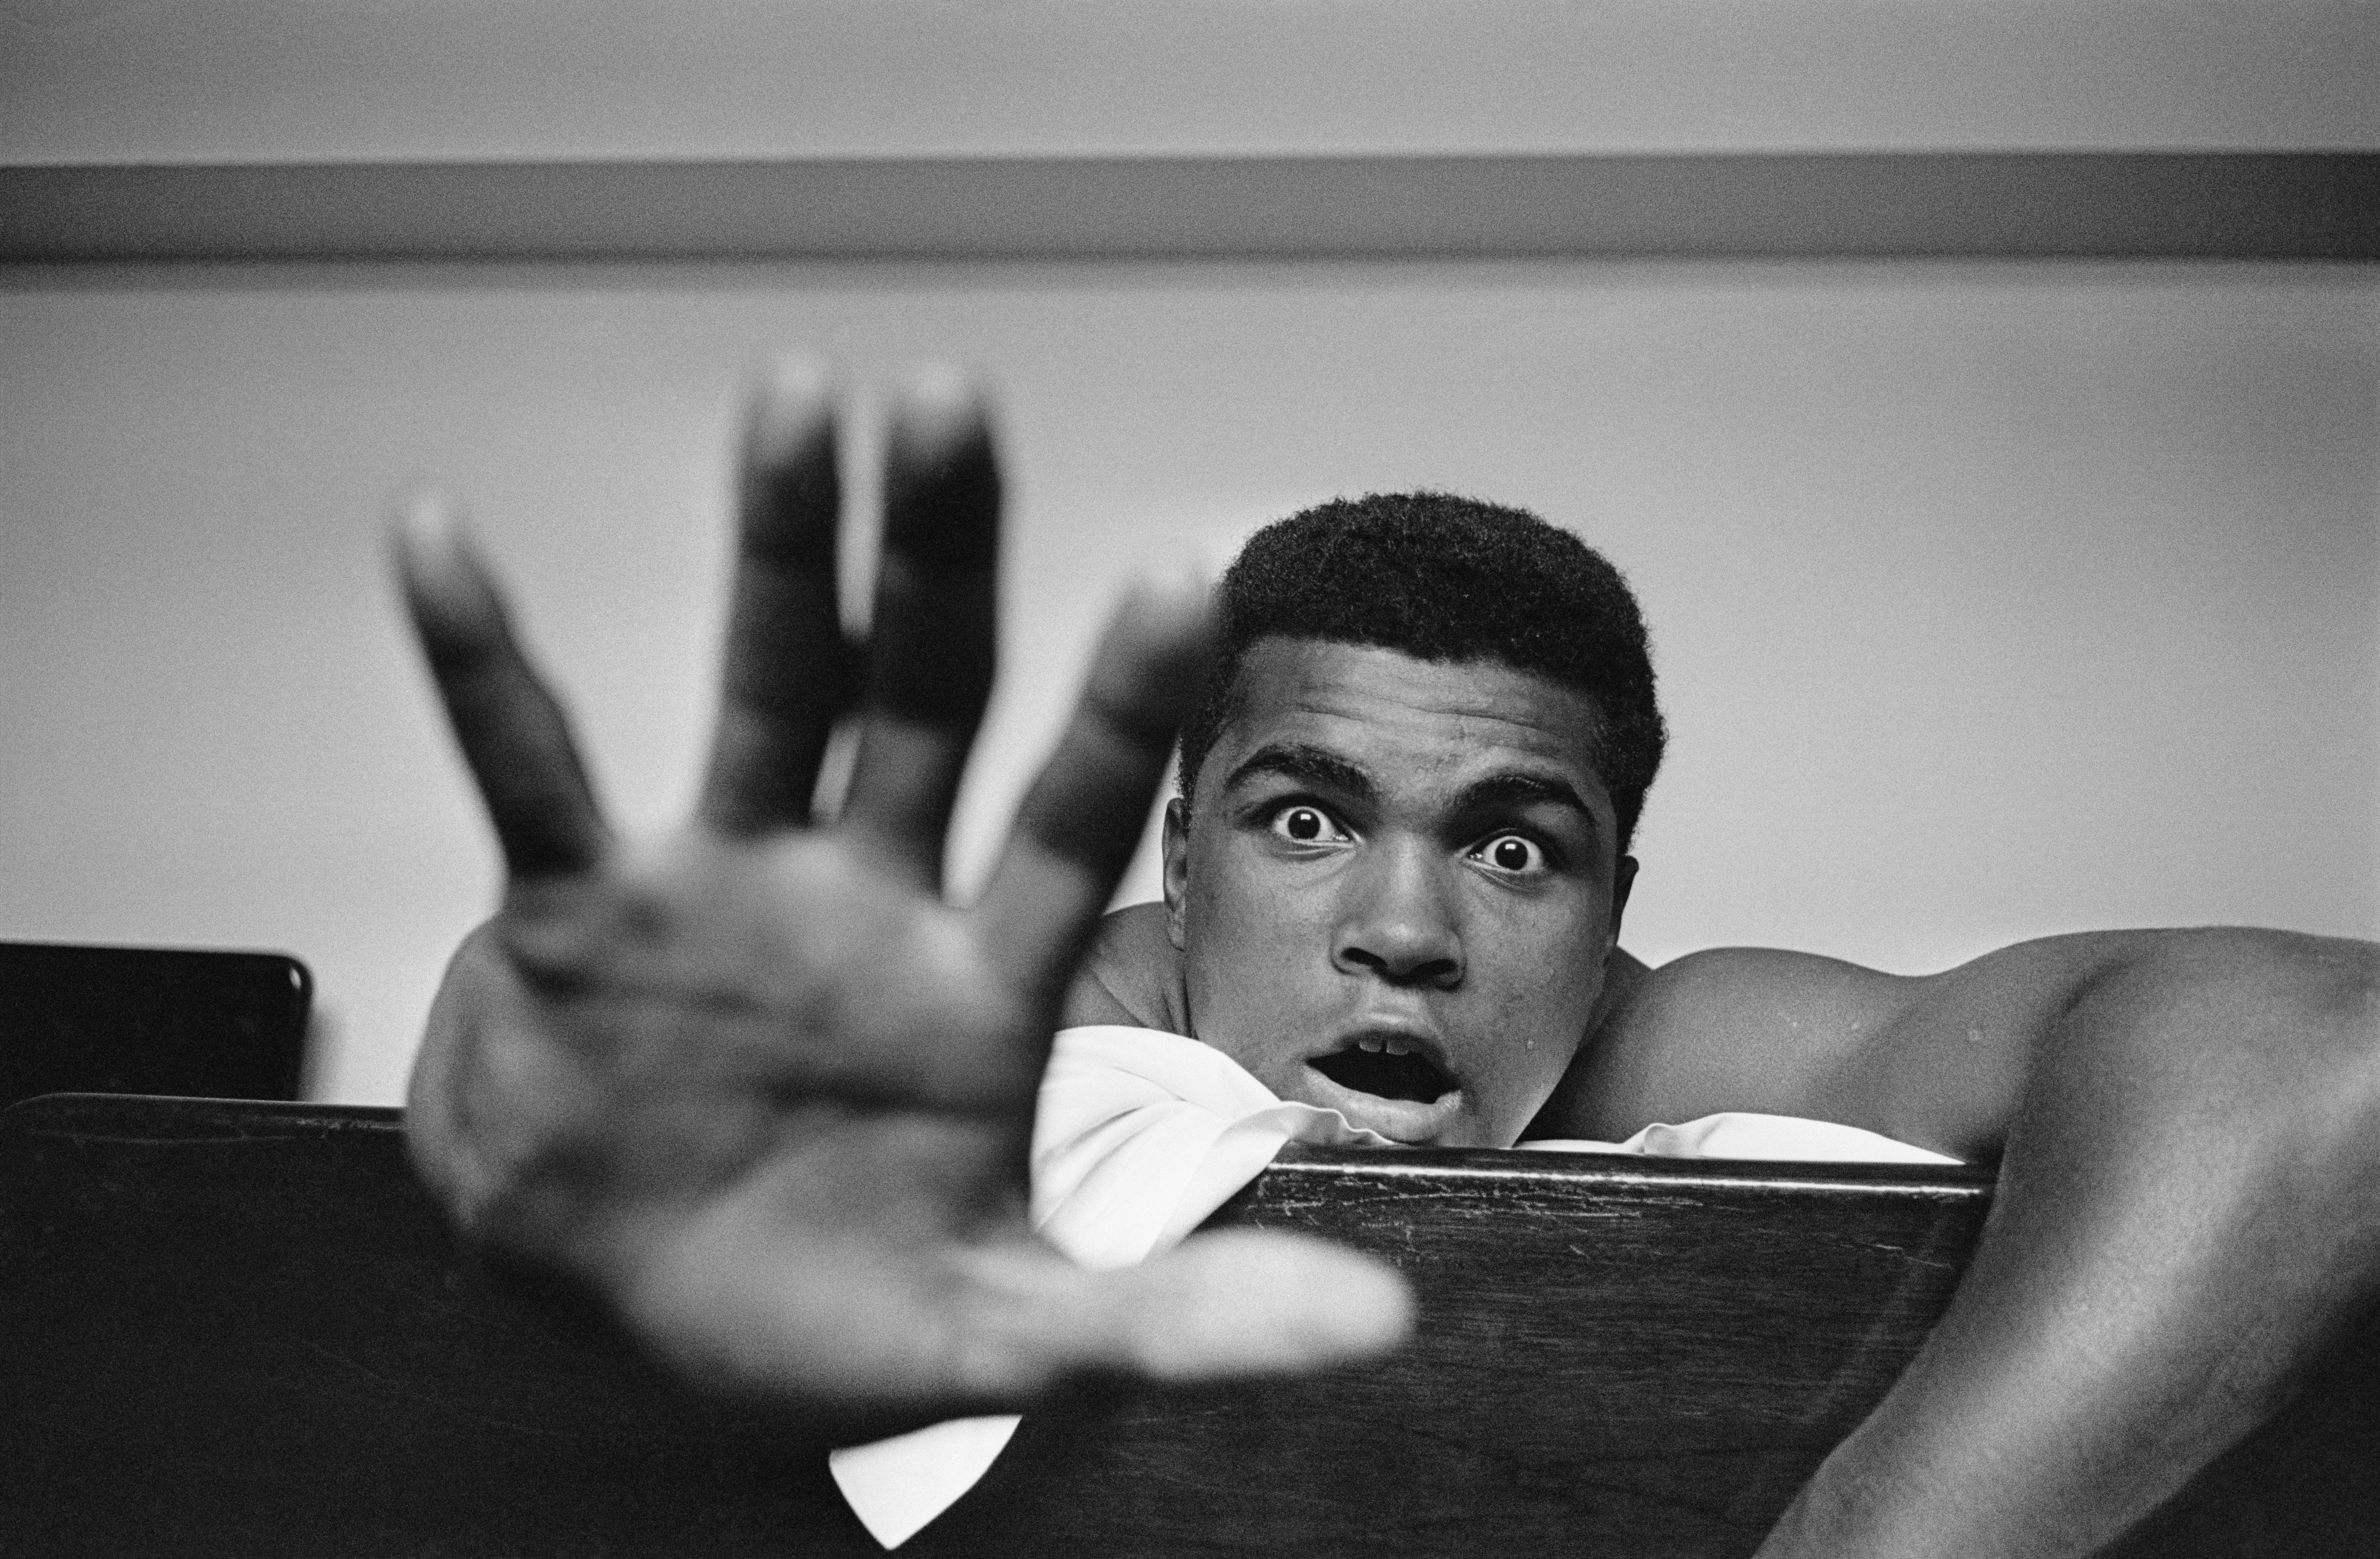  Give me a five: Ali in his hotel room holding up five fingers to show how many rounds it will take him to knock out British boxer Henry Cooper in 1963